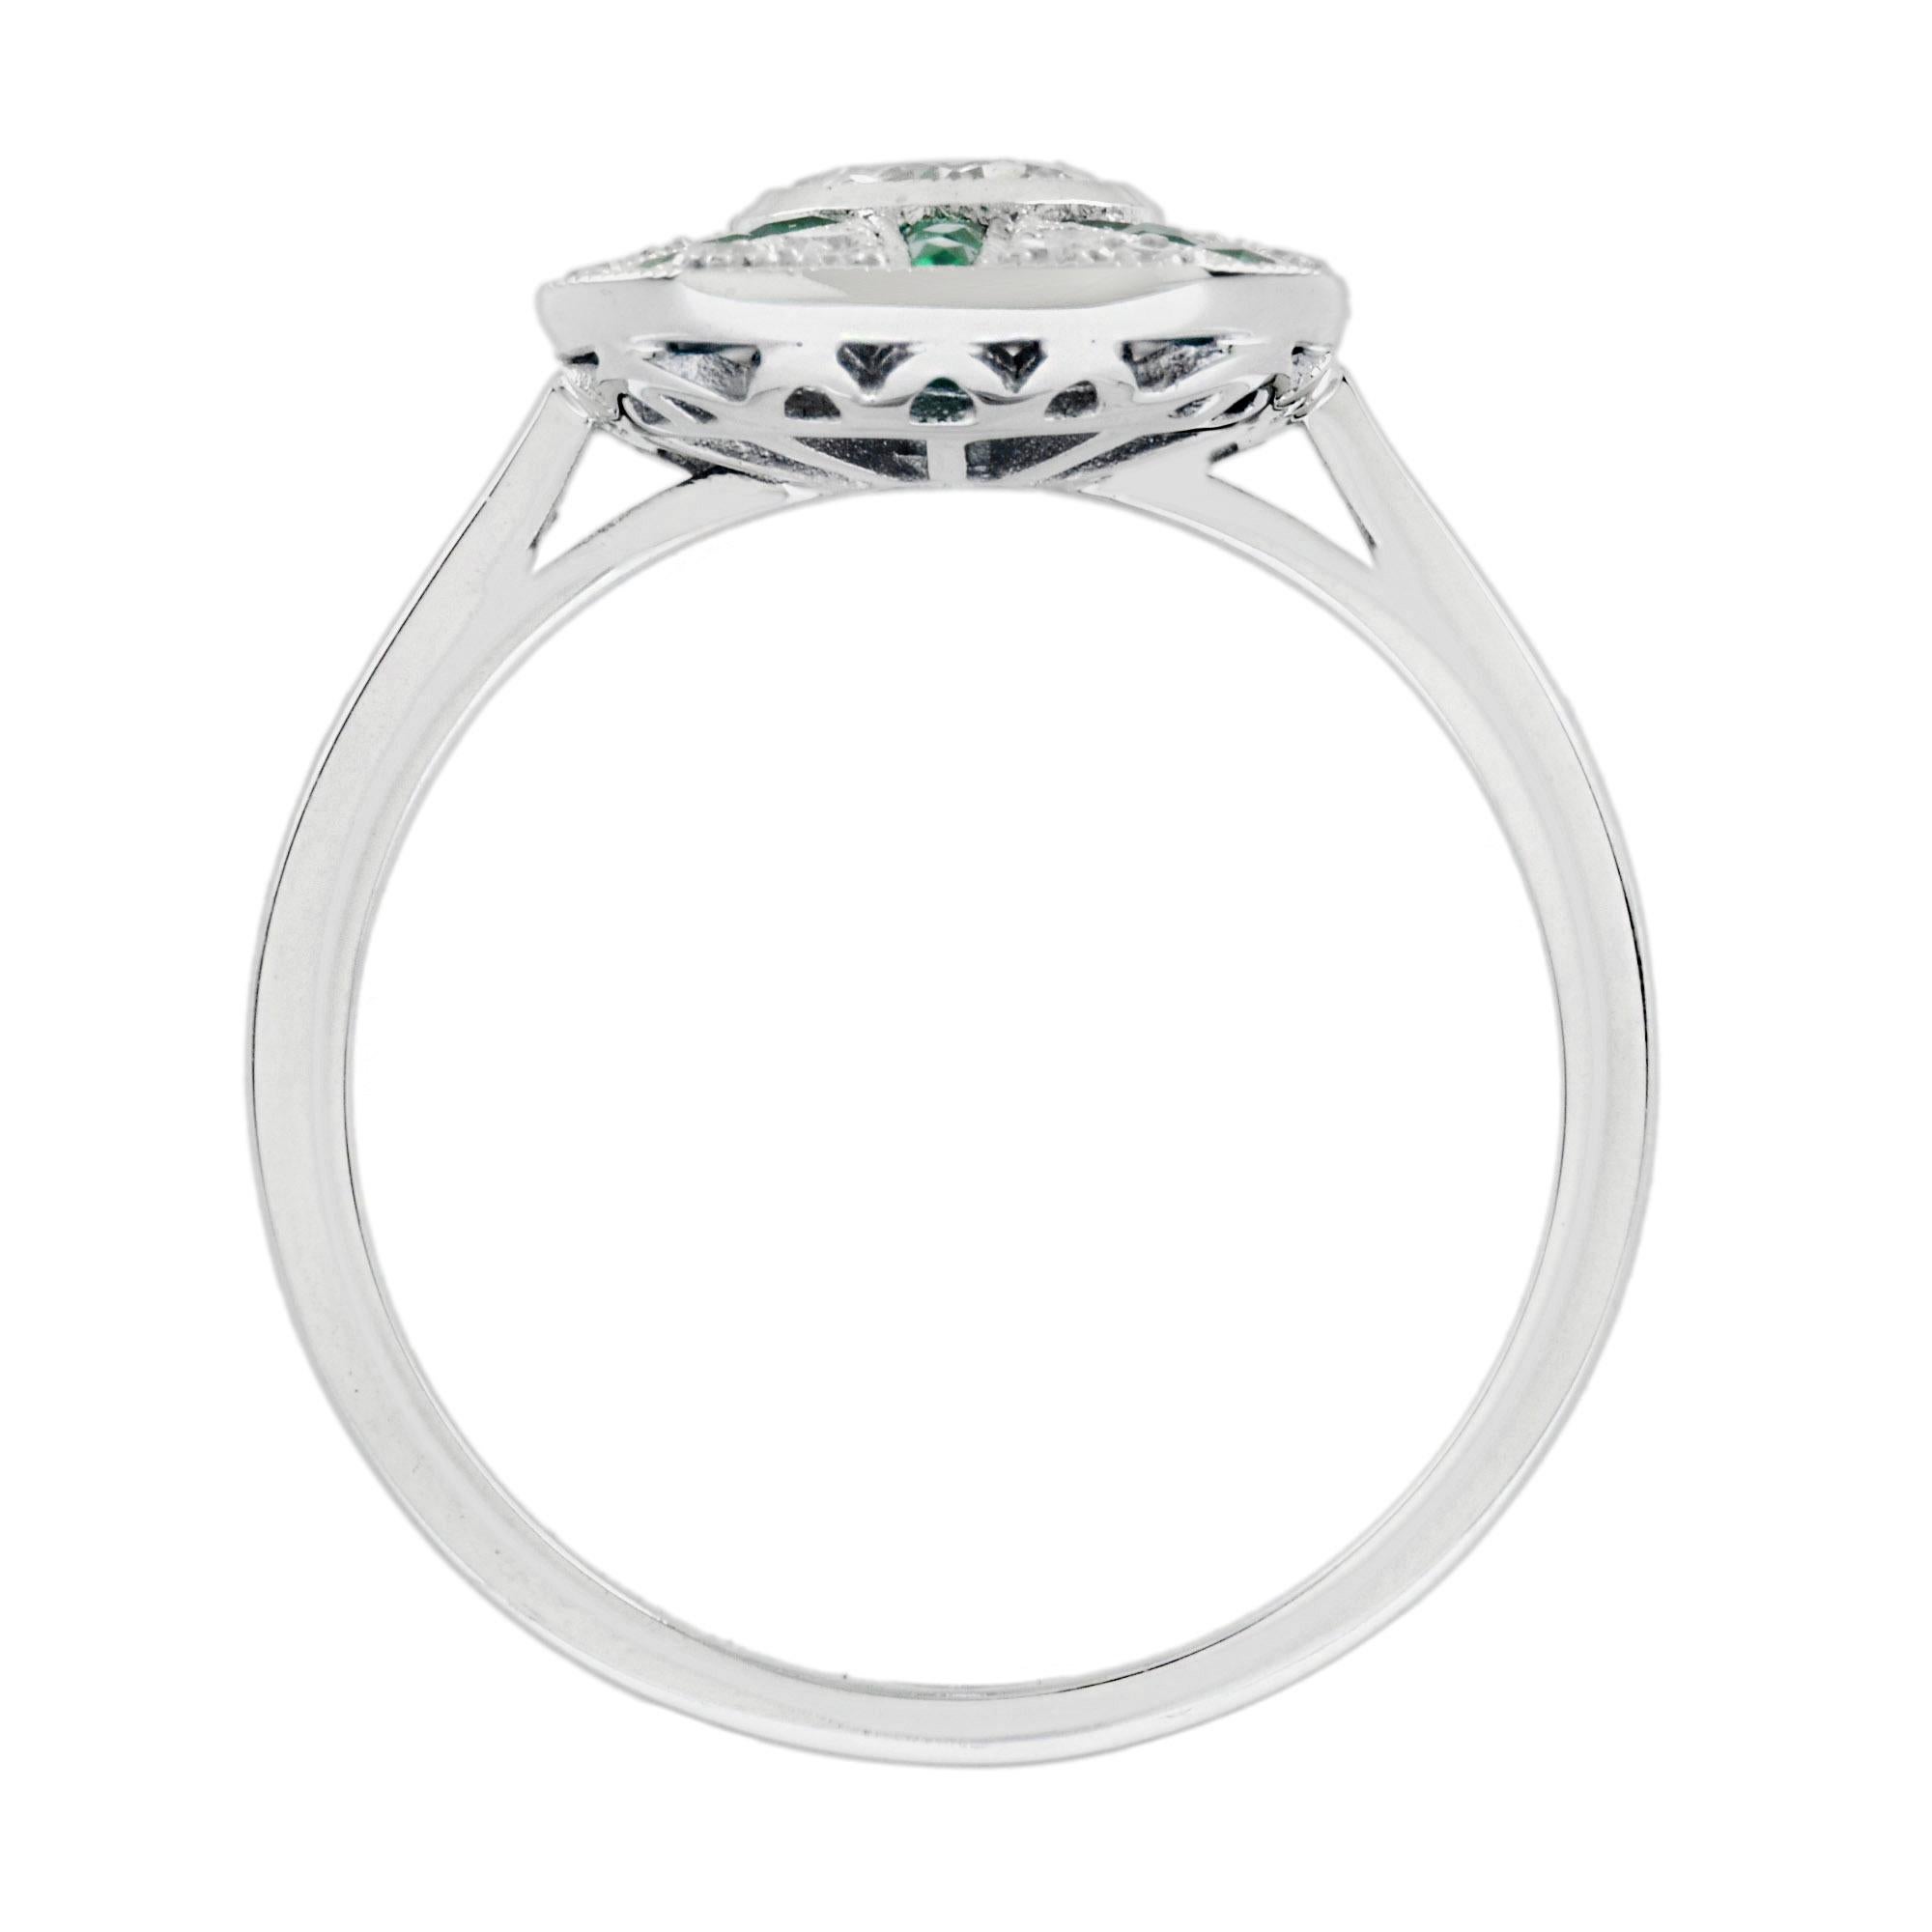 For Sale:  Diamond and Emerald Art Deco Style Halo Ring in 18K White Gold 6